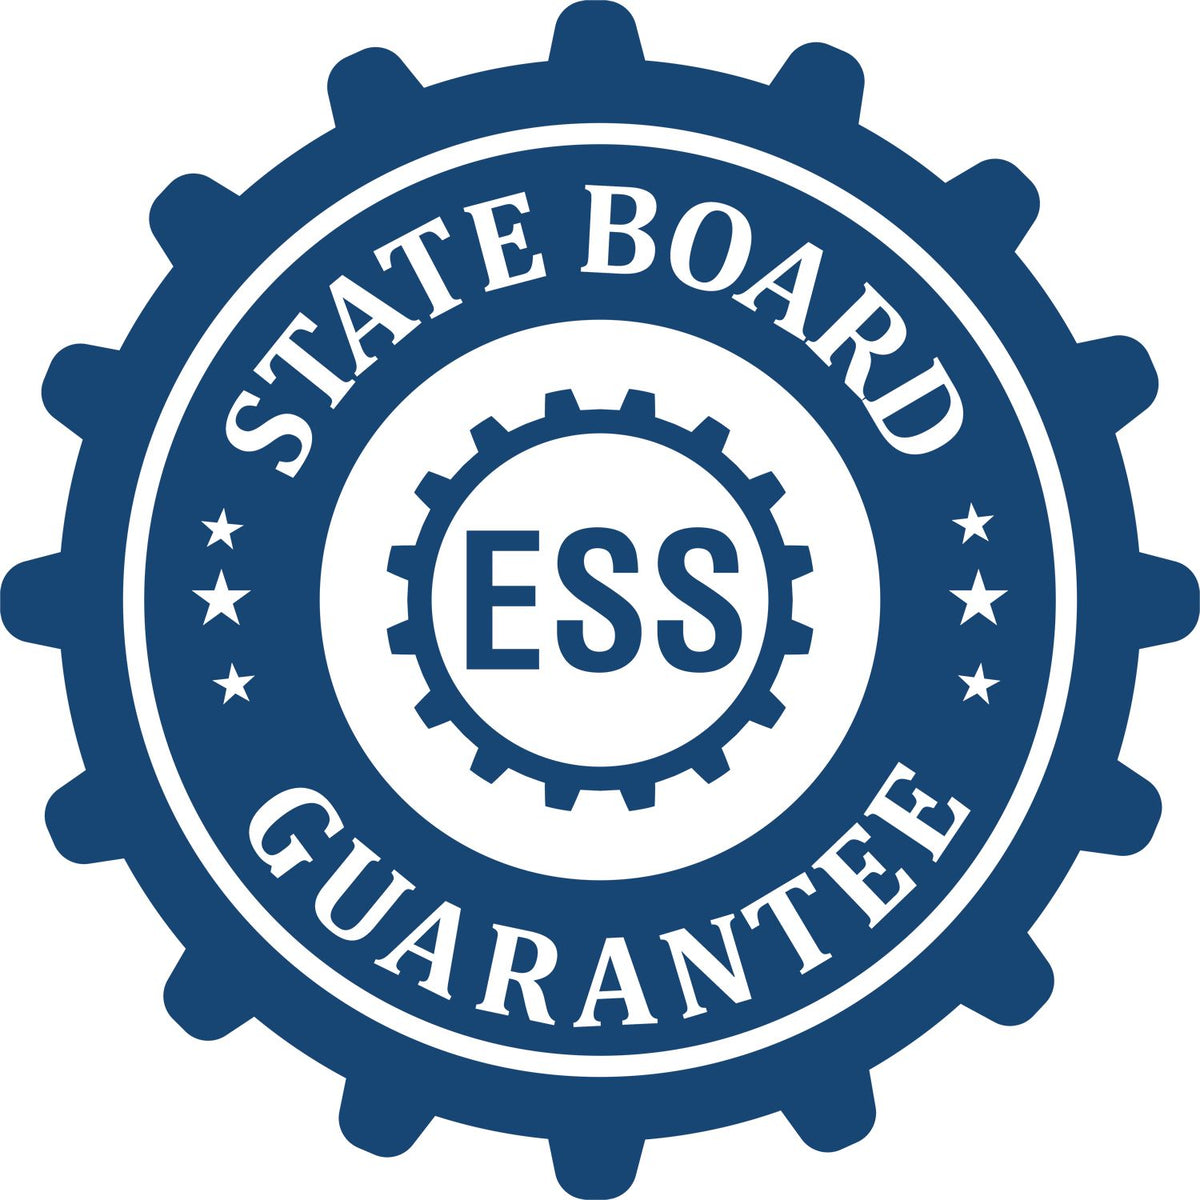 An emblem in a gear shape illustrating a state board guarantee for the New Hampshire Professional Engineer Seal Stamp product.